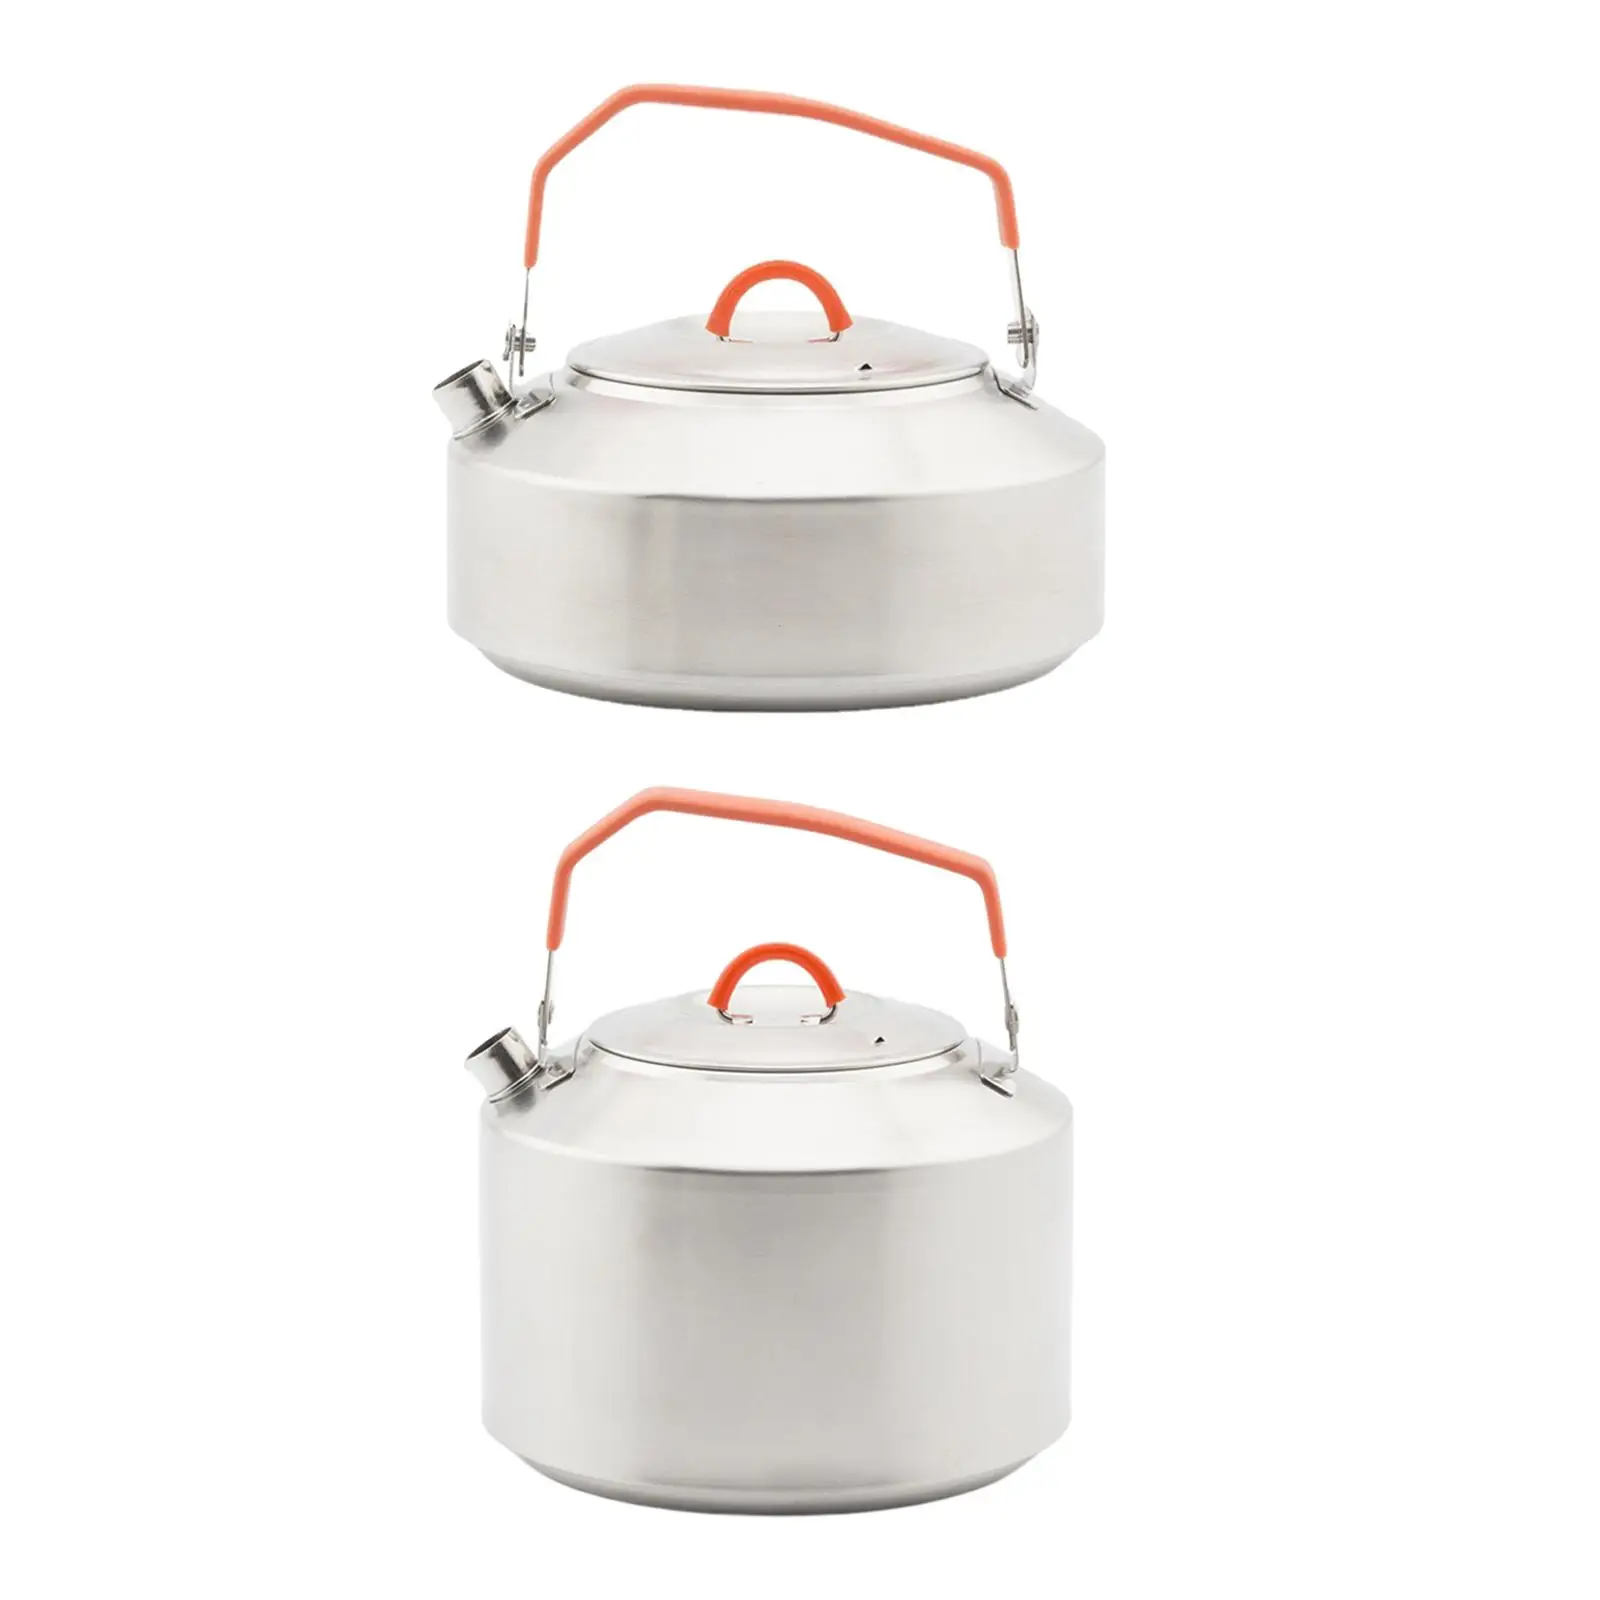 Lightweight Camping Kettle Campfire Kettle Teapot Coffee Pot for Hiking